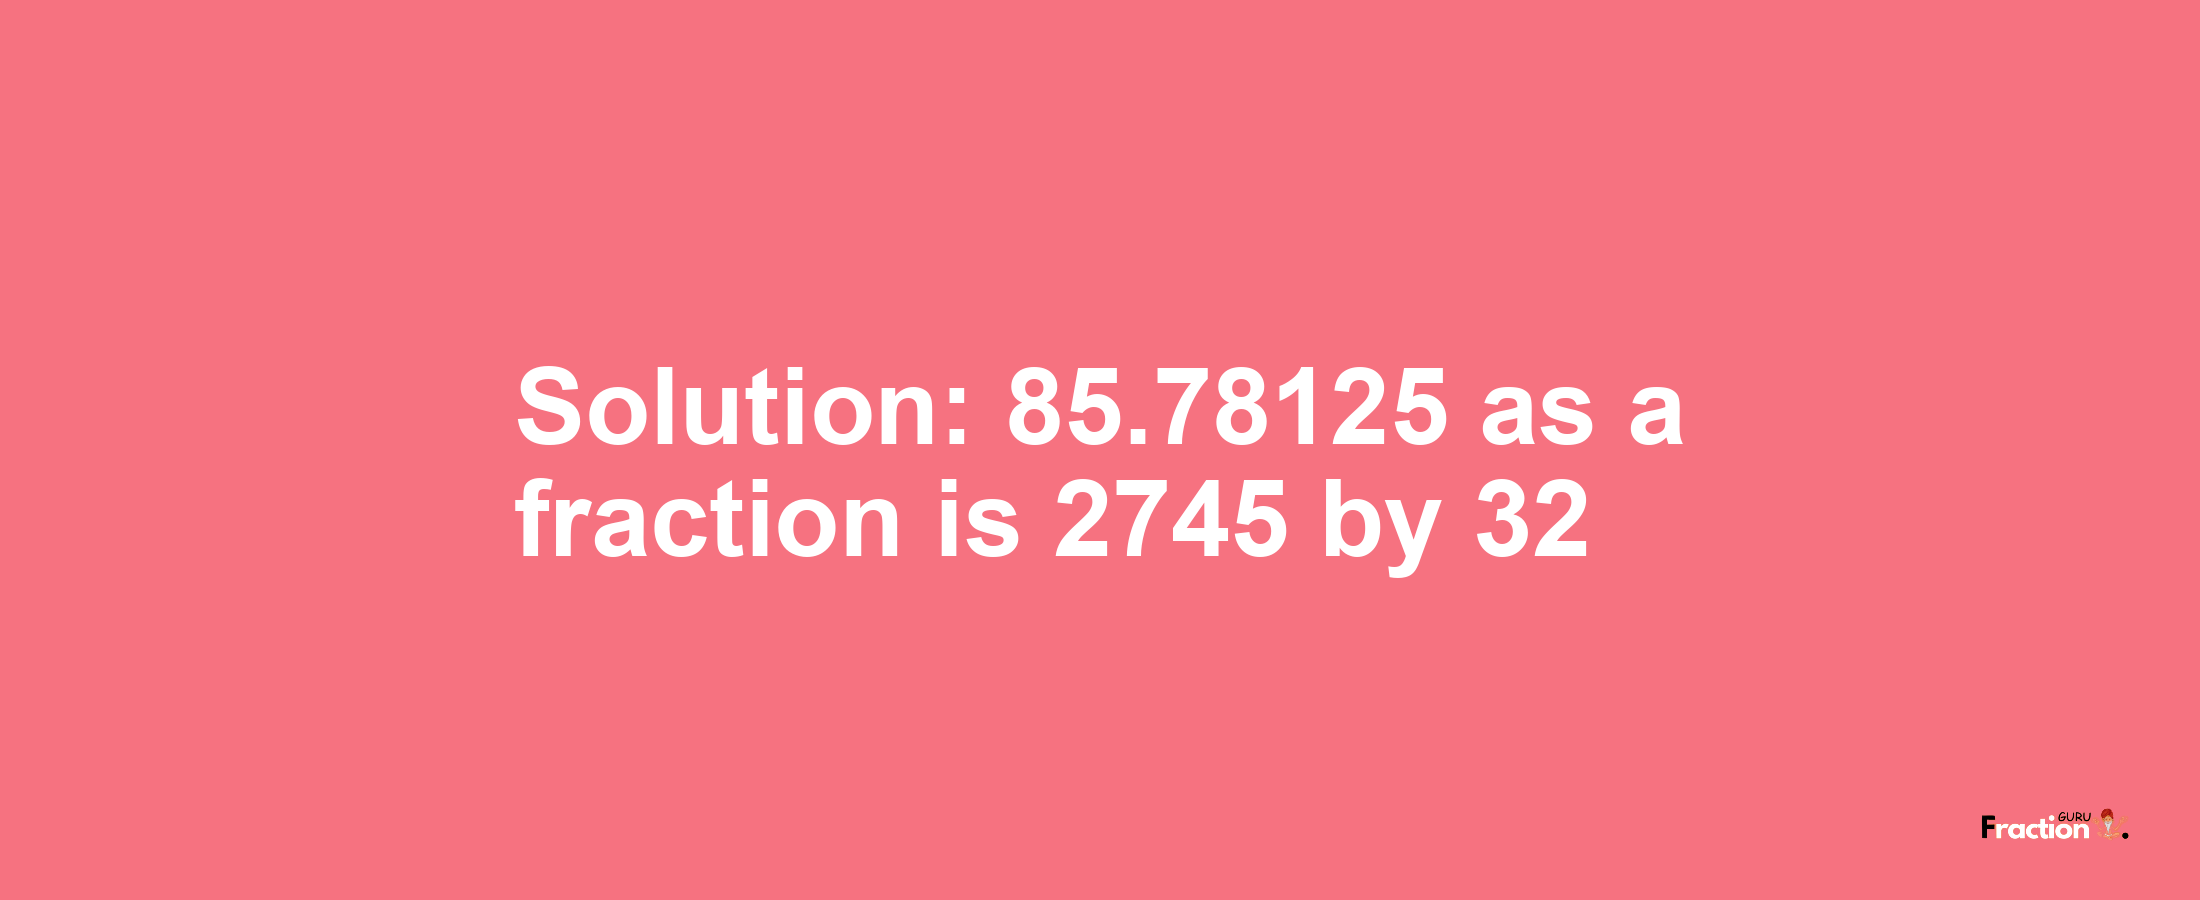 Solution:85.78125 as a fraction is 2745/32